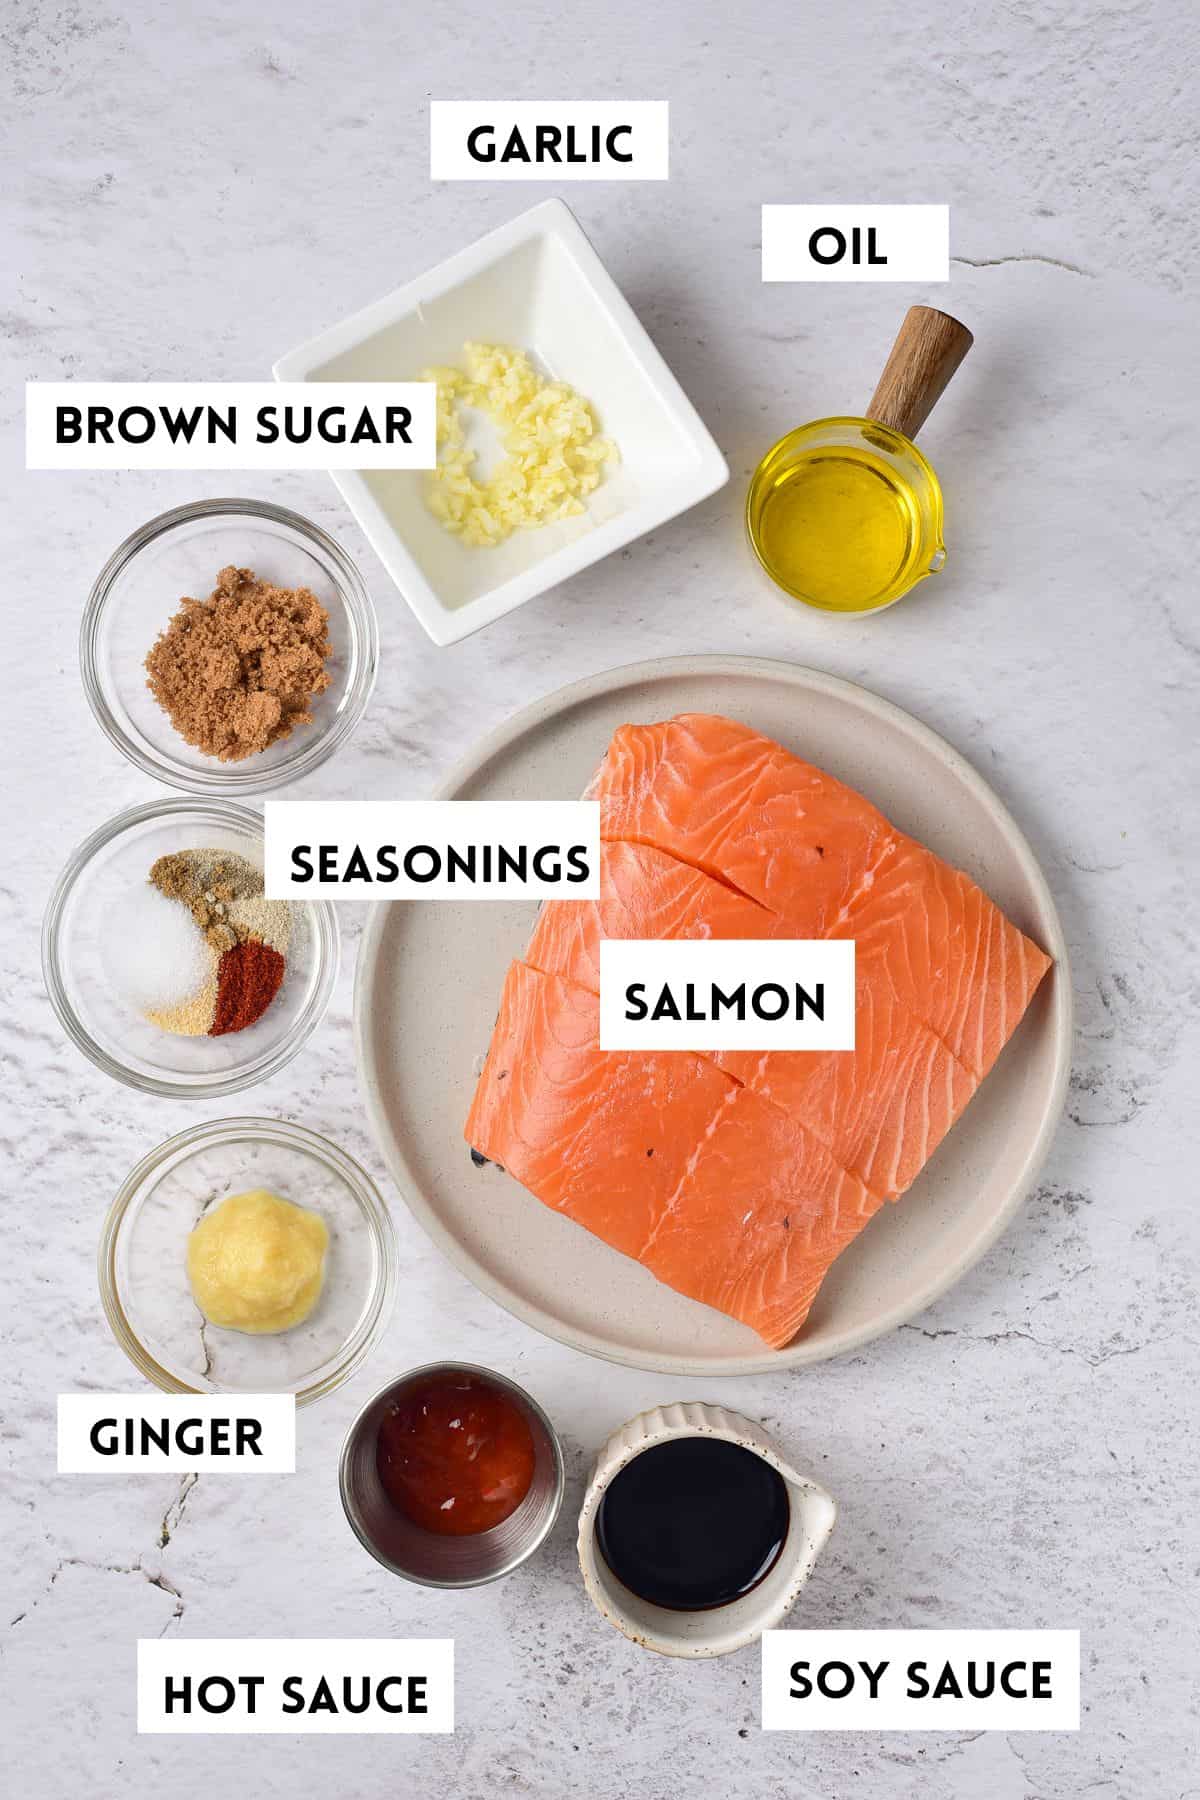 Ingredients used to make the salmon marinade.